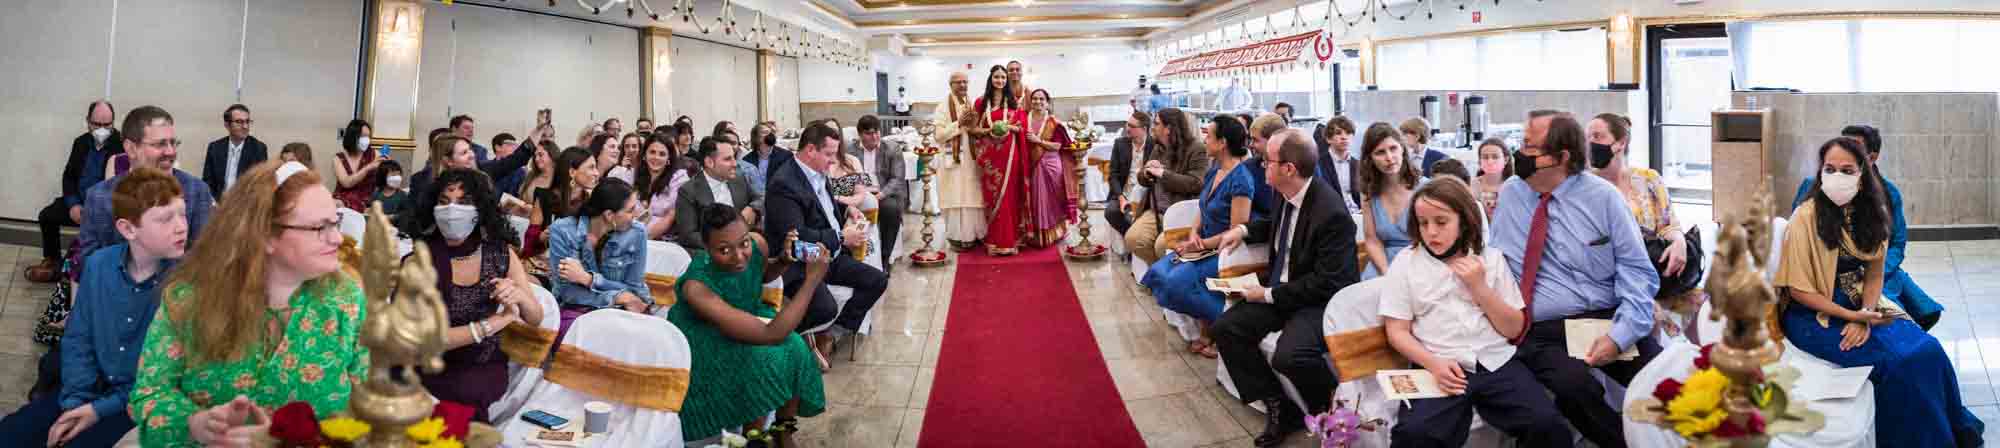 Wide shot of guests at Hindu Temple Society of North America wedding